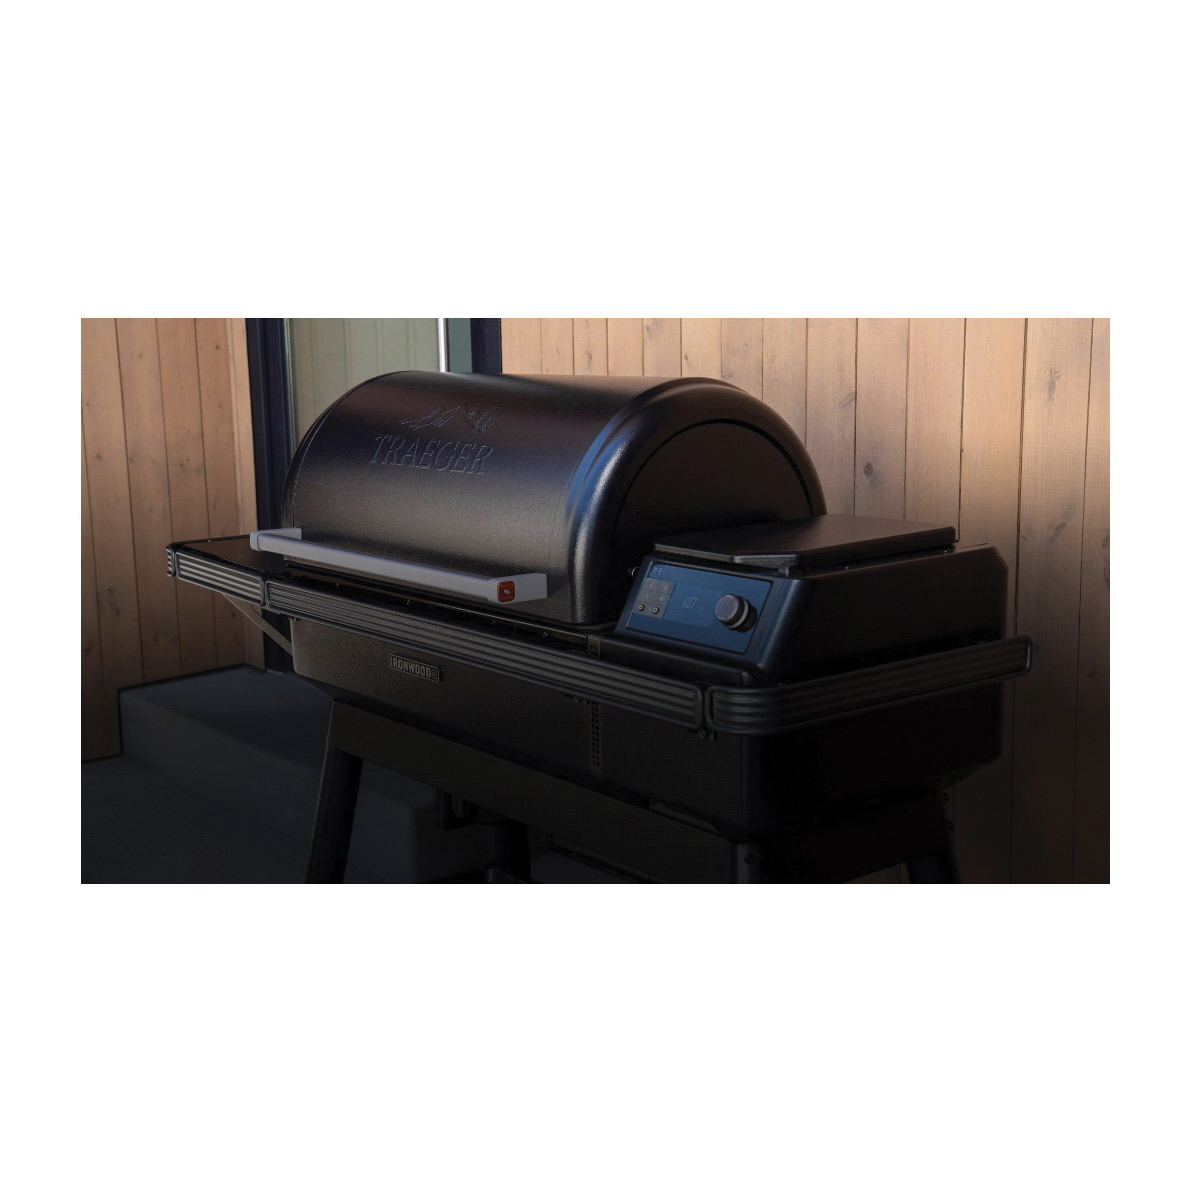 Traeger Ironwood XL Series TFB93RLG Pellet Grill, 594 sq-in Primary Cooking Surface, 330 sq-in Secondary Cooking Surface - 3